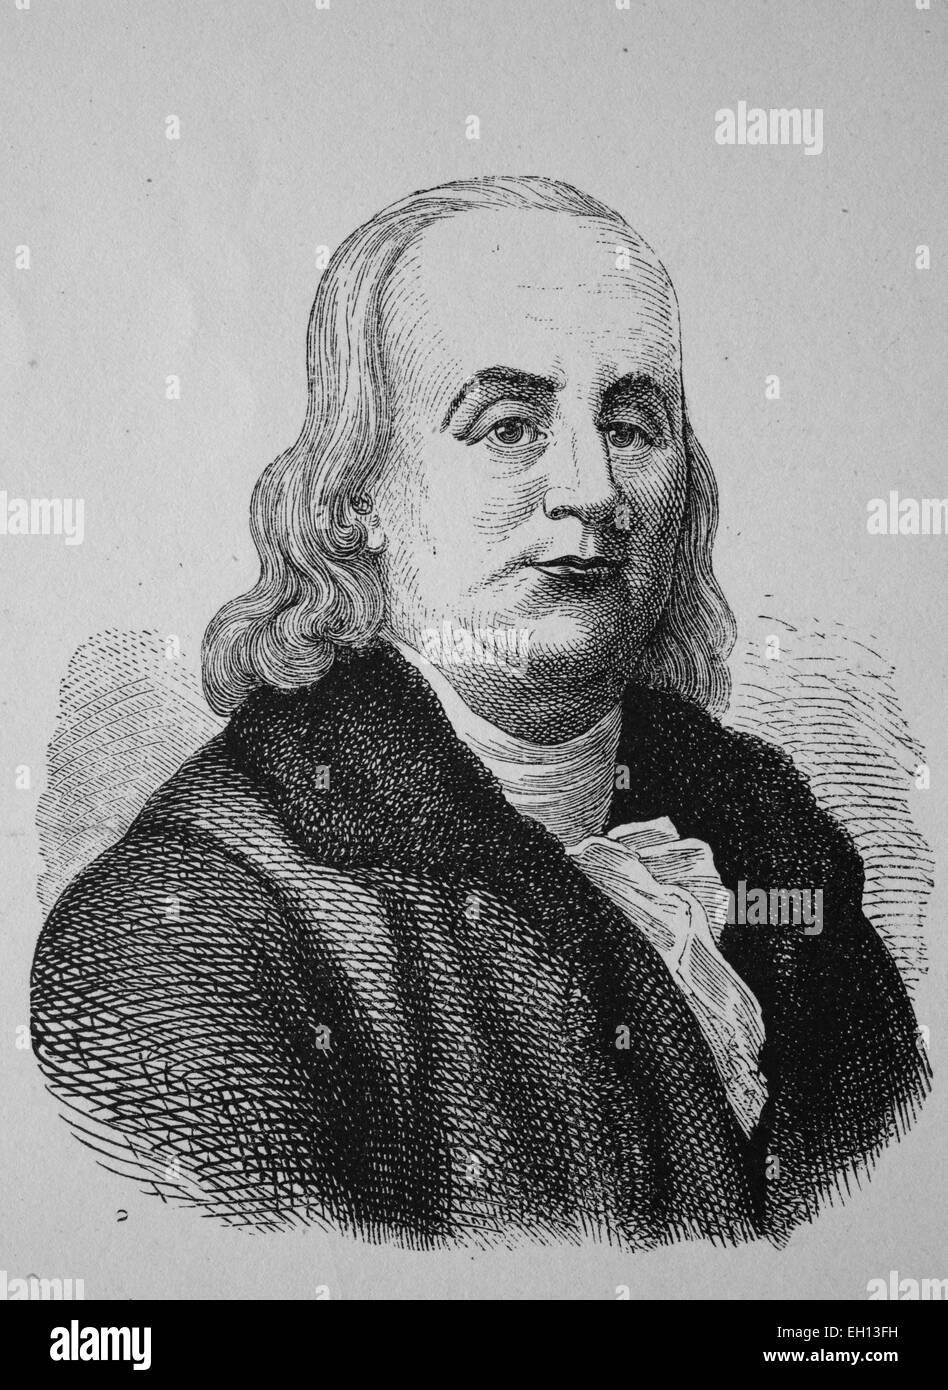 Benjamin Franklin, 1706 - 1790, one of the founders of the United States of America, the inventor of the lightning rod, historic woodcut, circa 1880 Stock Photo